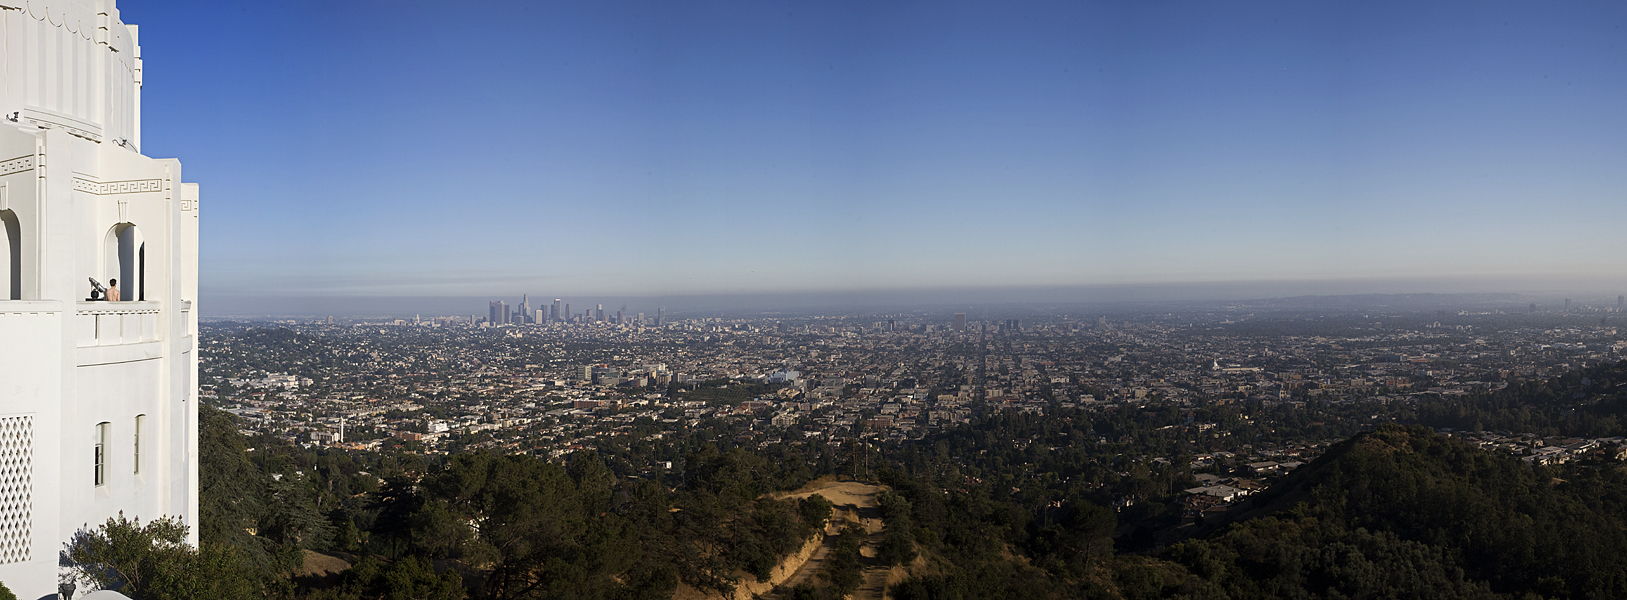 Pano from the observatory